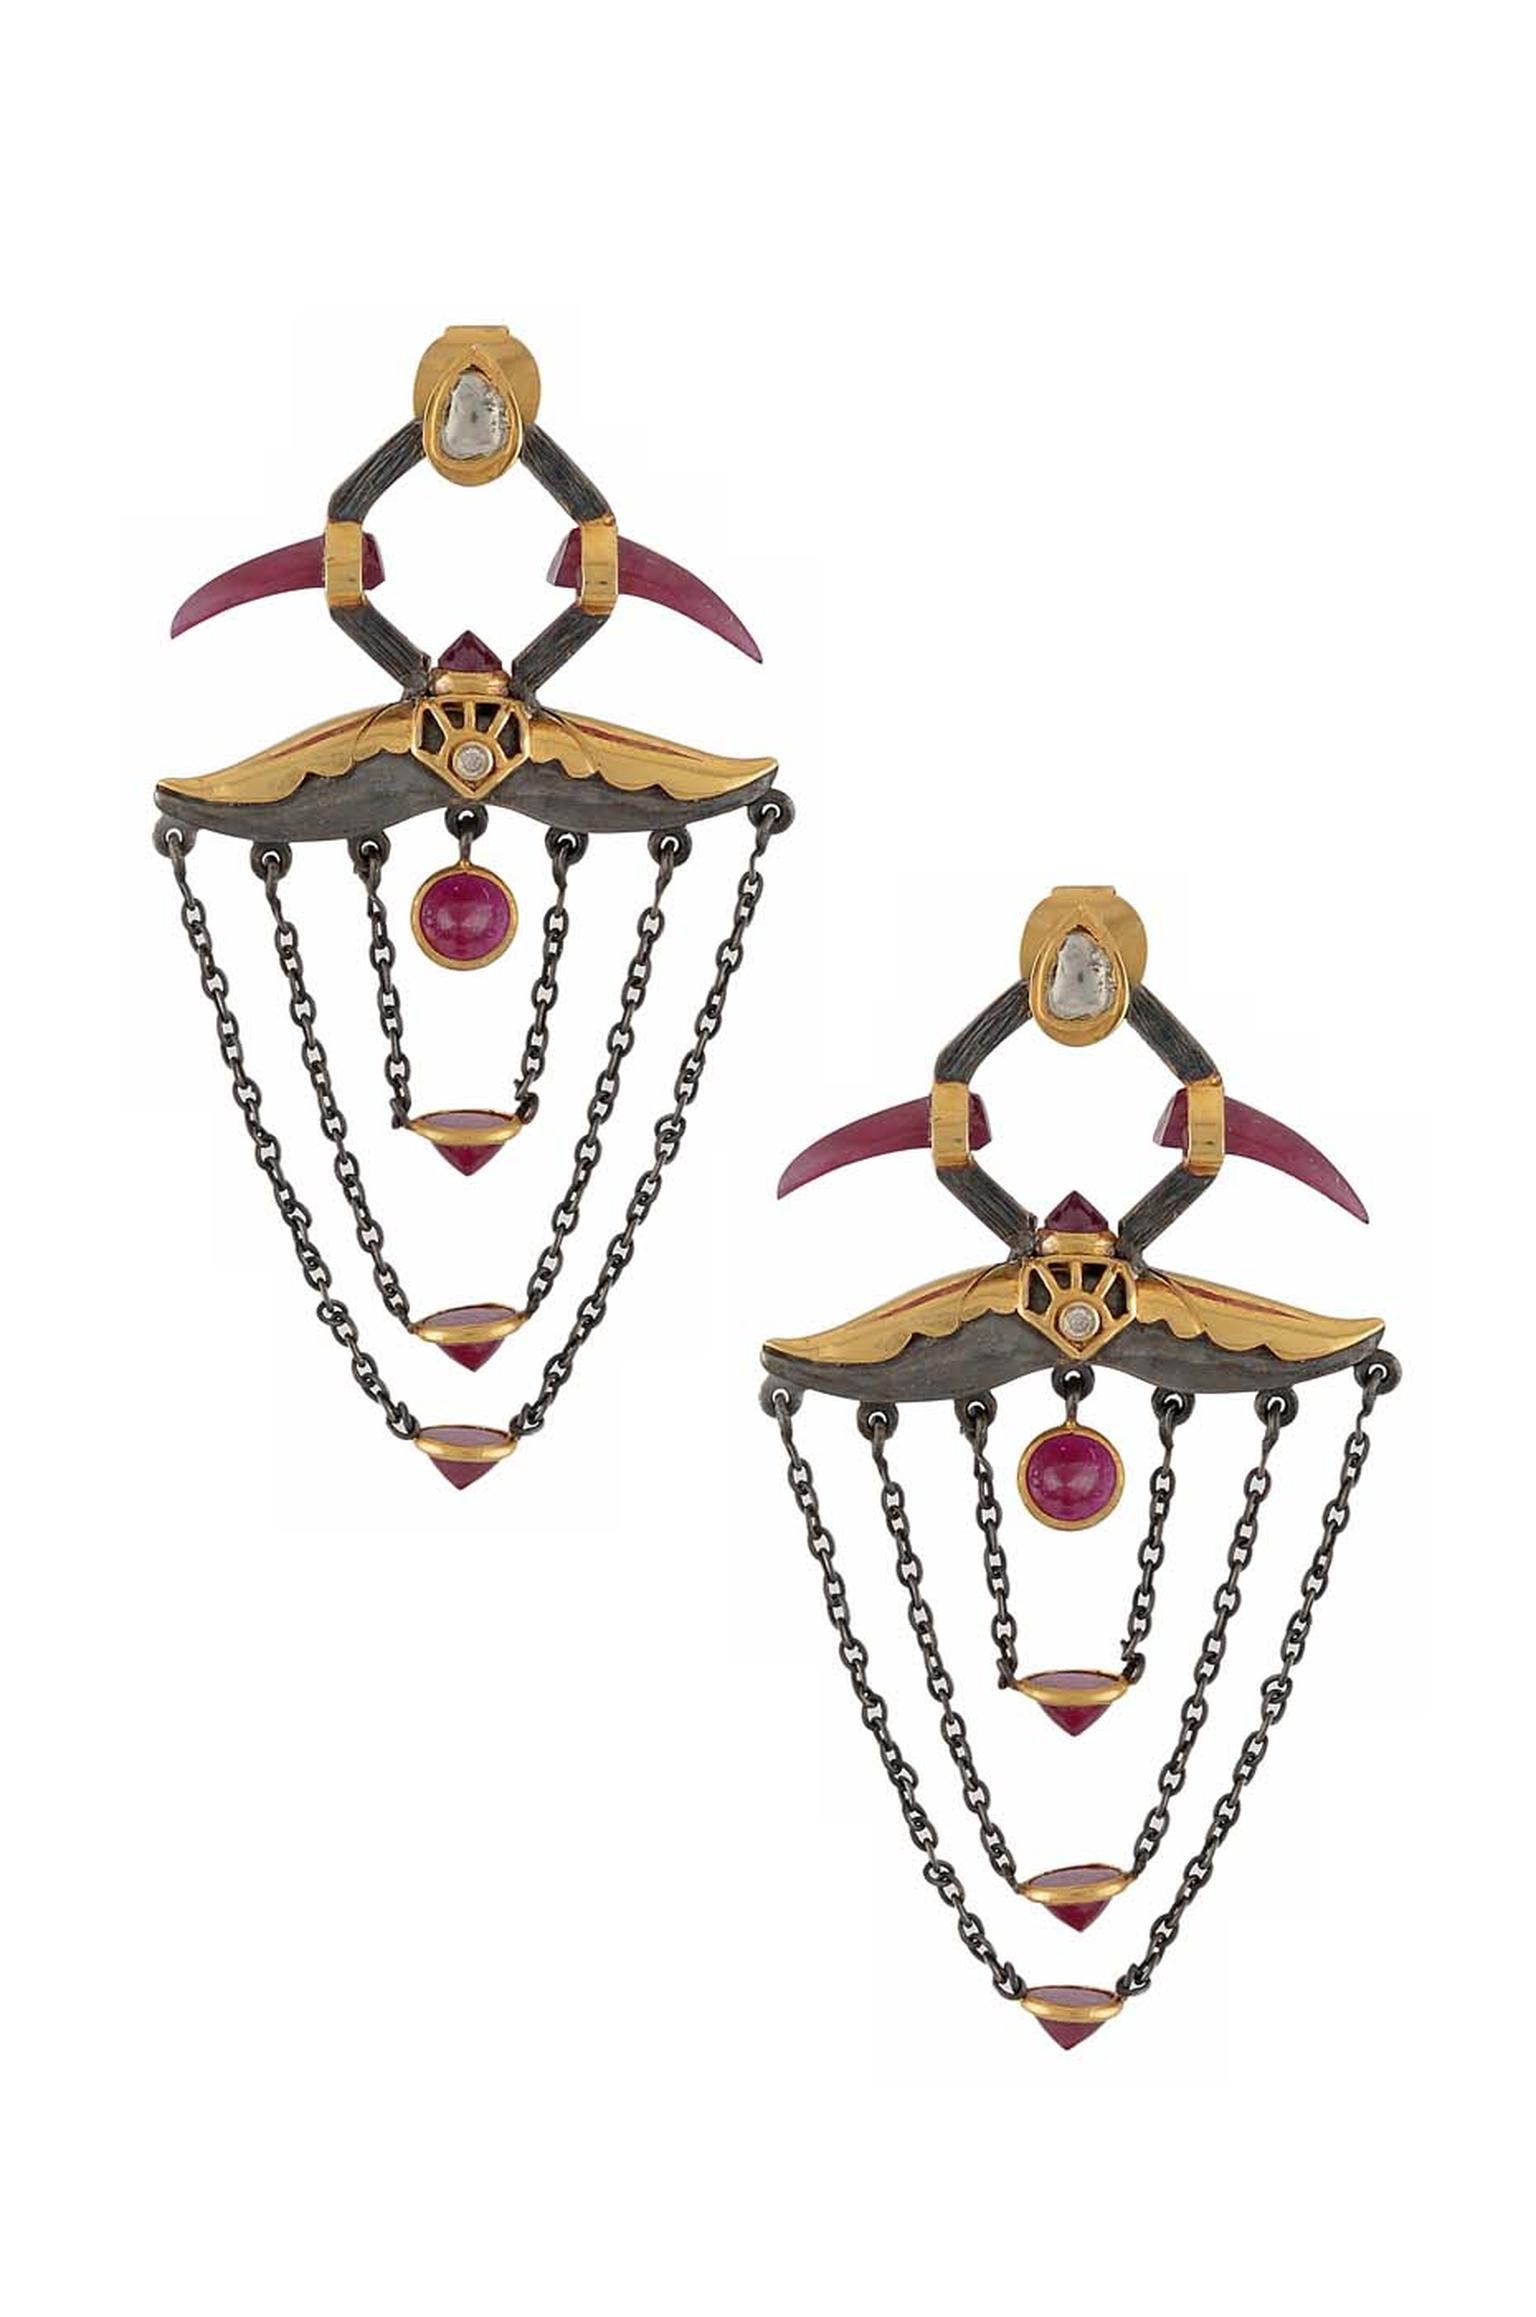 Amrapali Dark Maharaja Blood Horn earrings in silver and gold with rubies and diamonds.